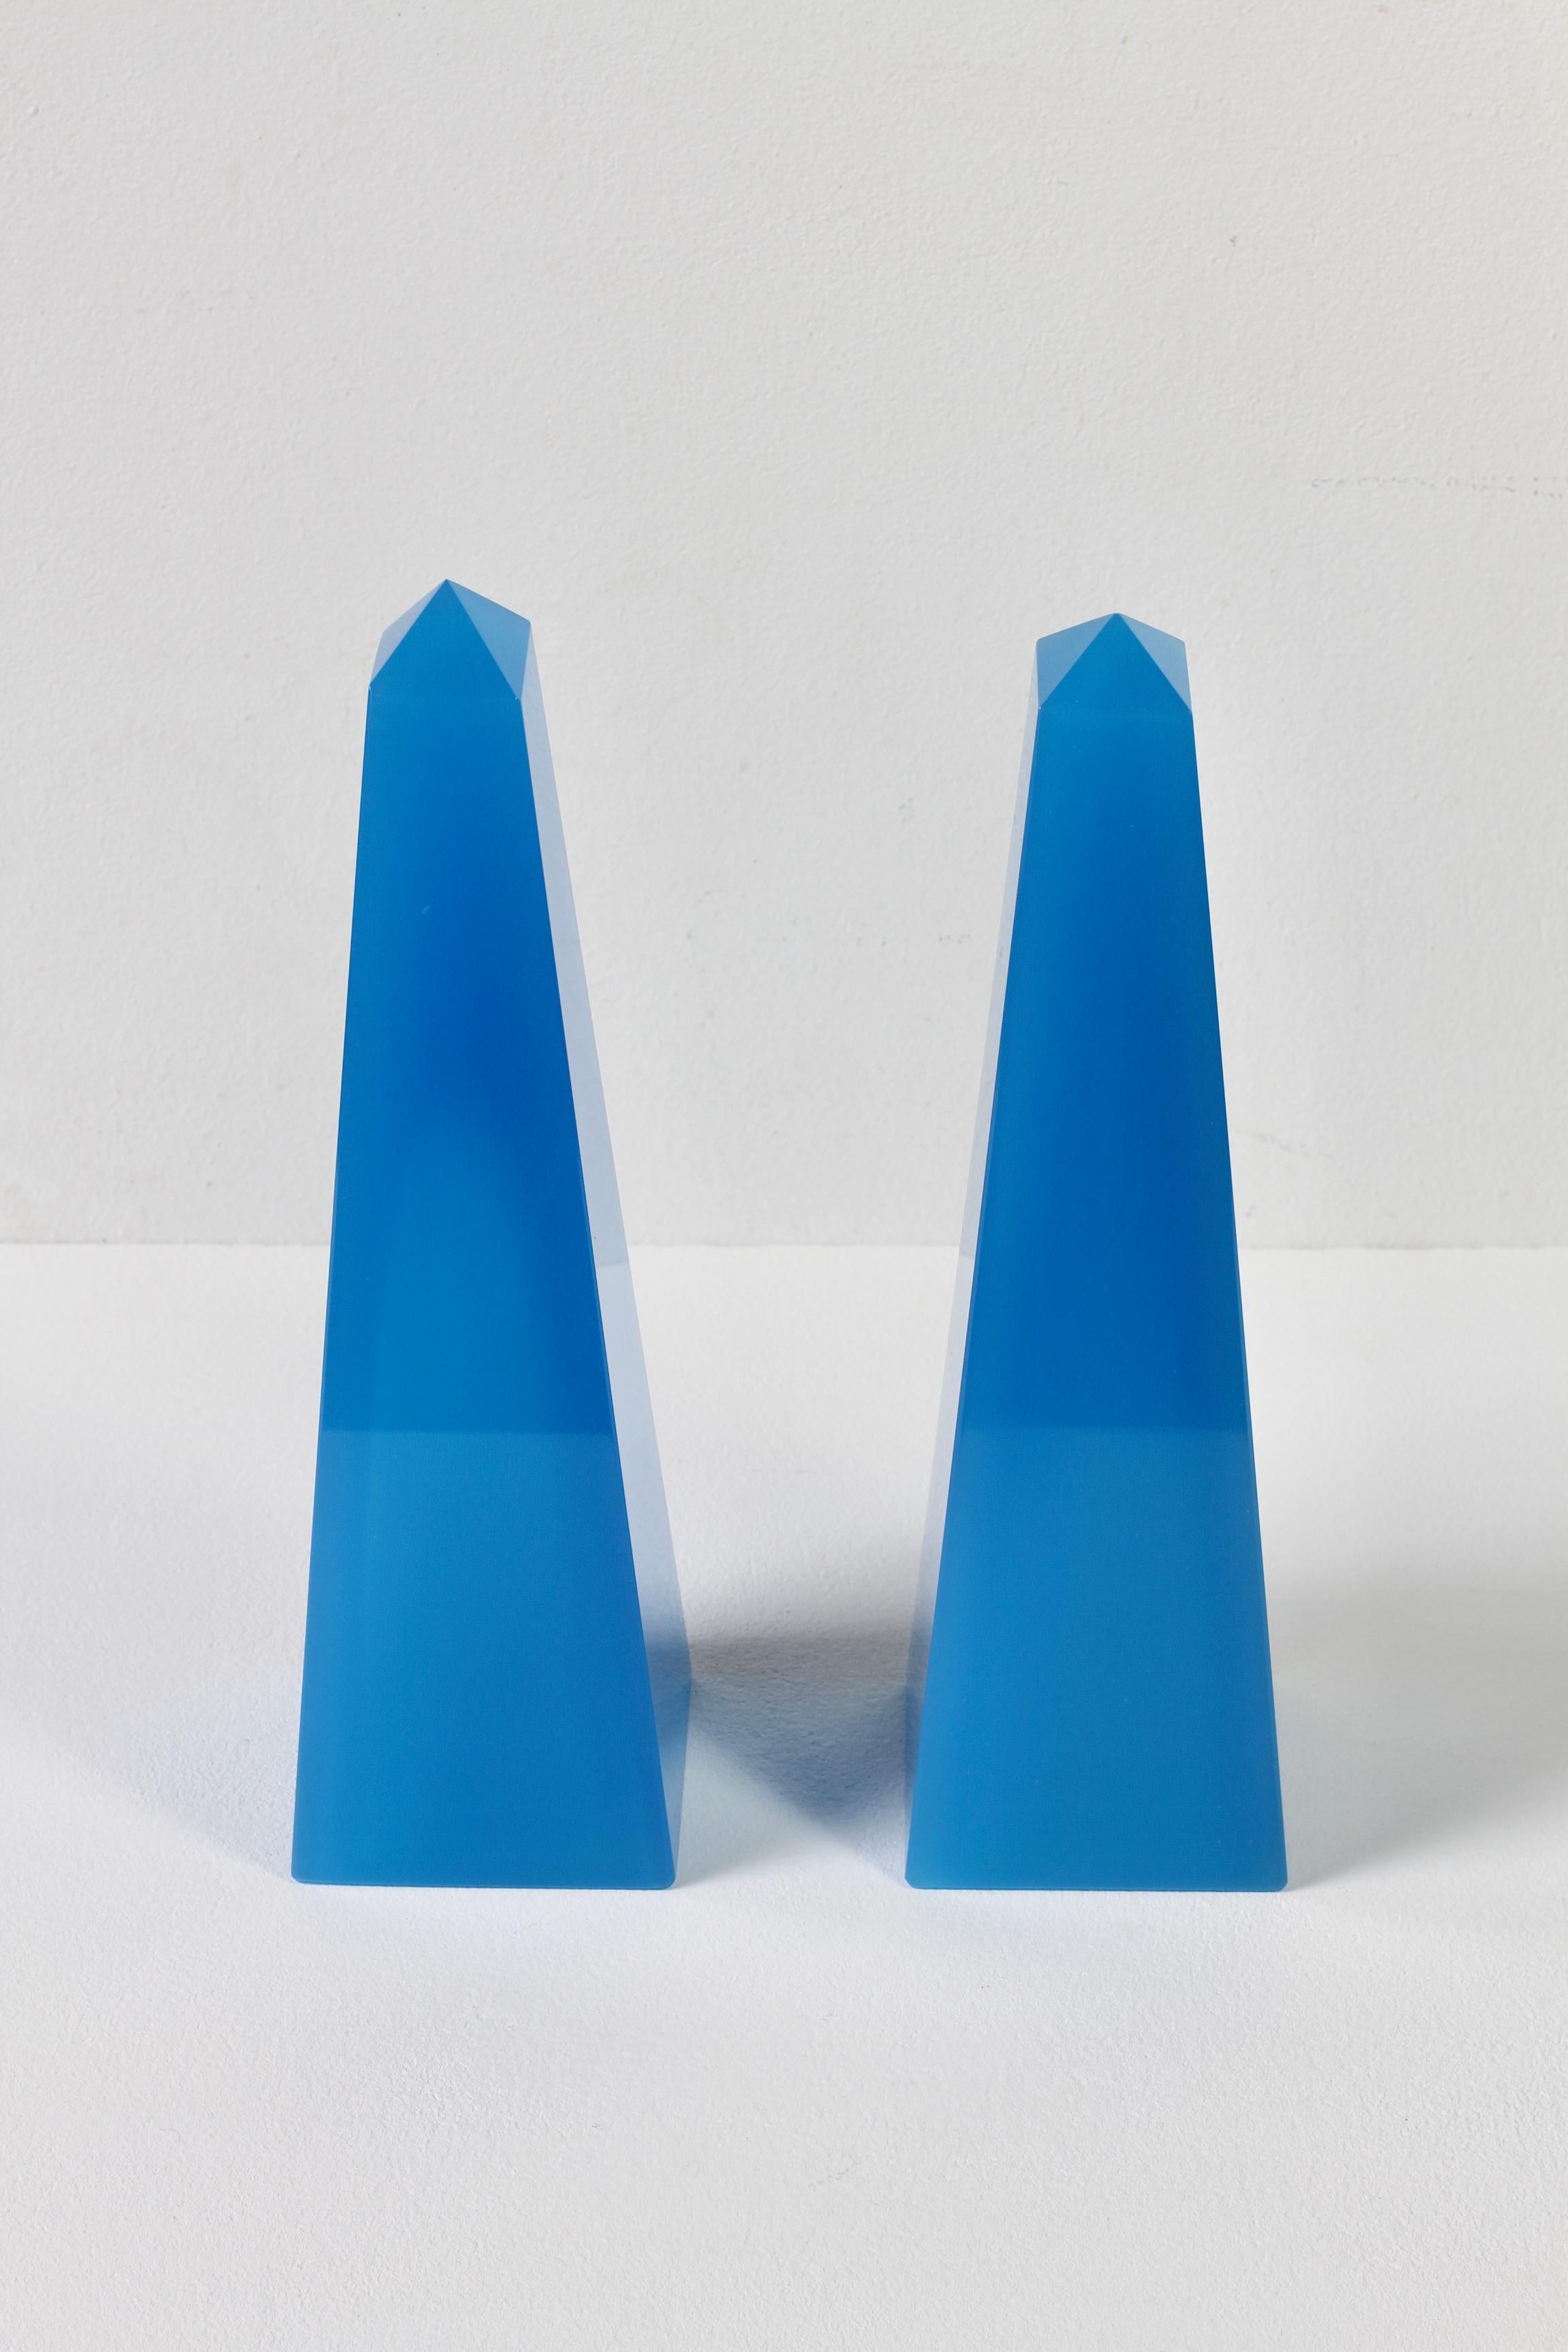 Cenedese Mid-Century Modern Vintage Pair of Blue Italian Murano Glass Obelisks In Excellent Condition For Sale In Landau an der Isar, Bayern